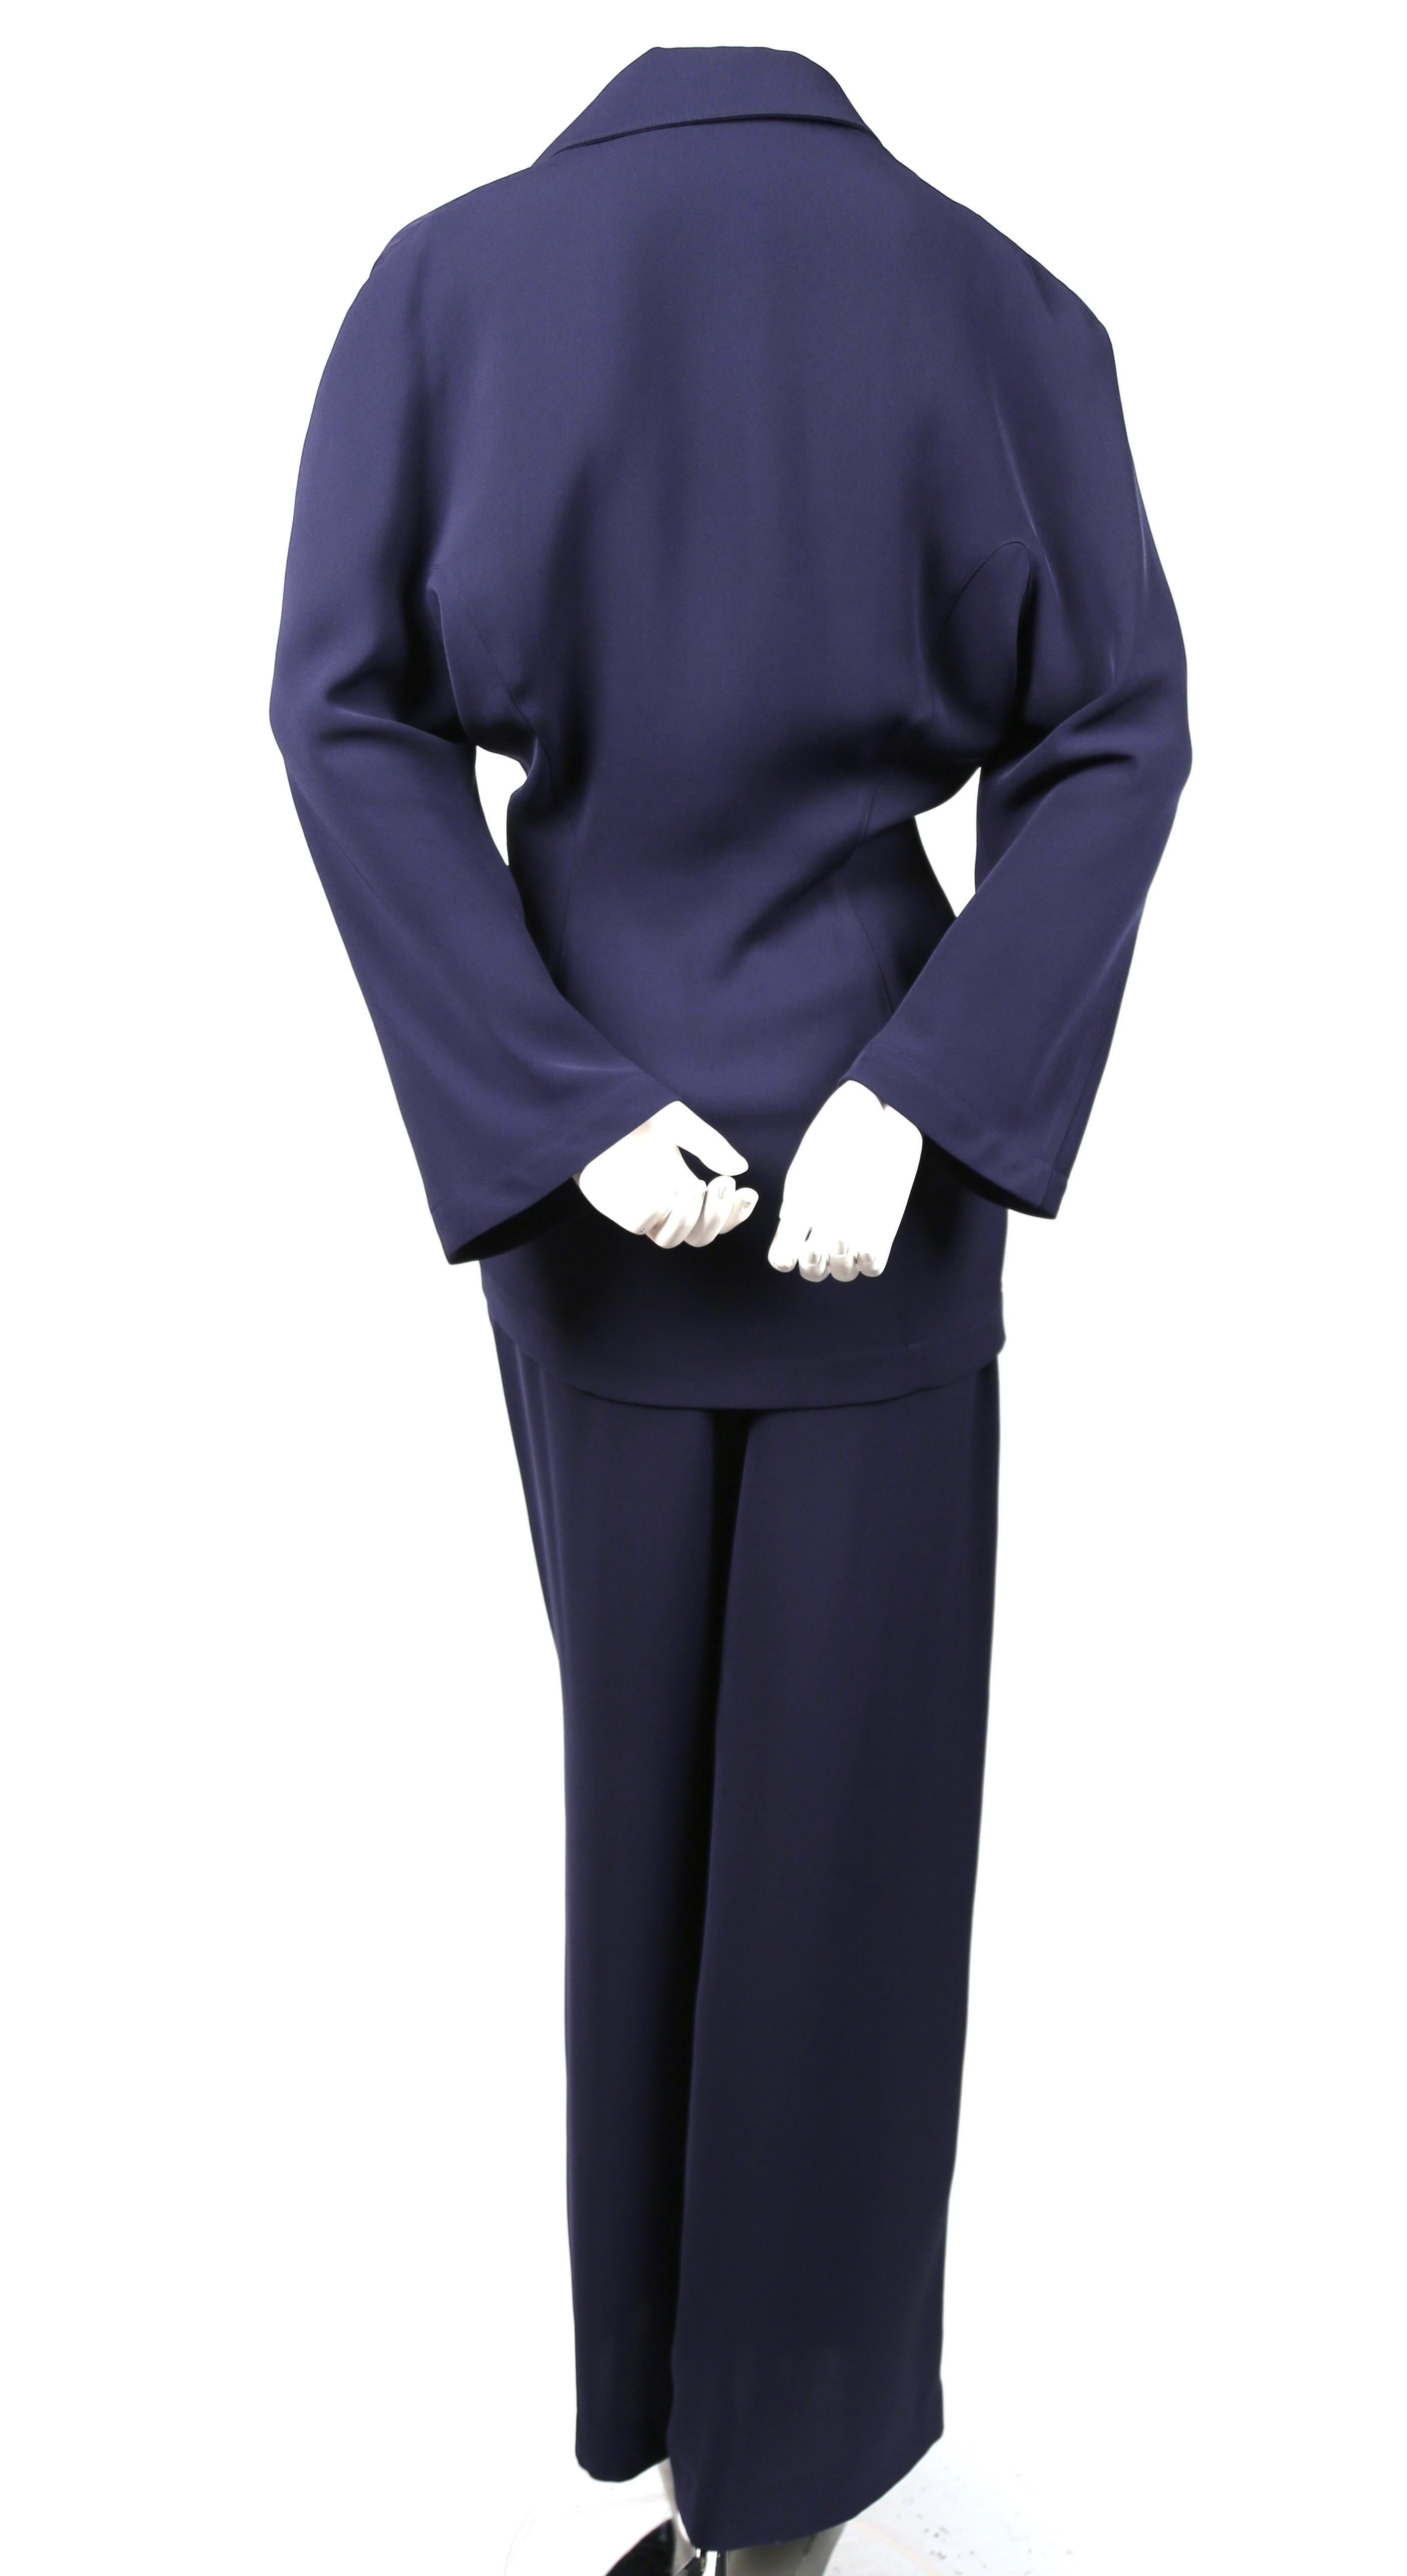 Women's 1990's THIERRY MUGLER navy blue suit with wrap jacket